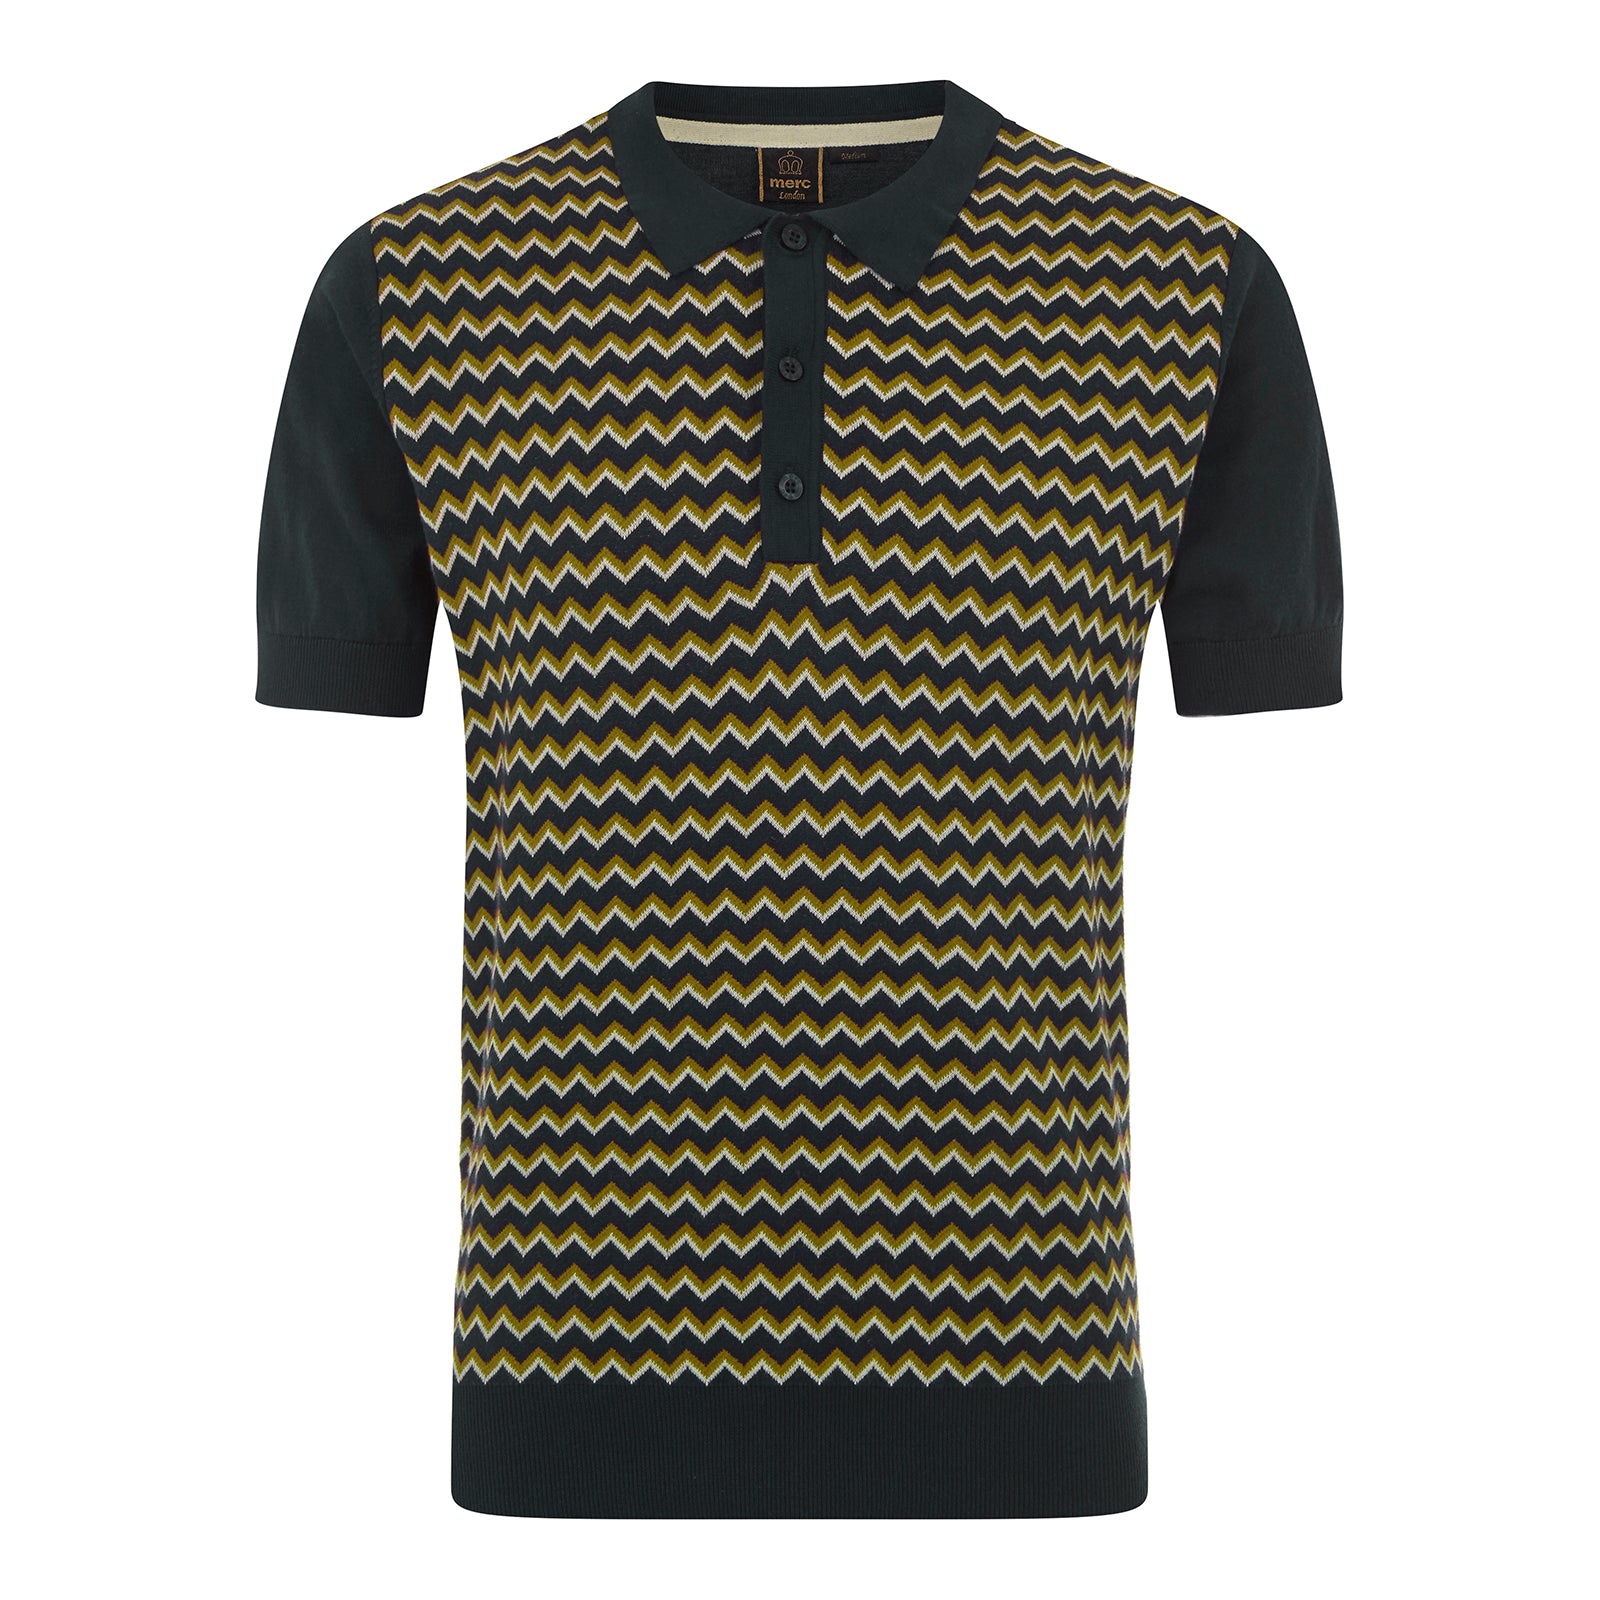 Demick Knitted Polo - Merc London